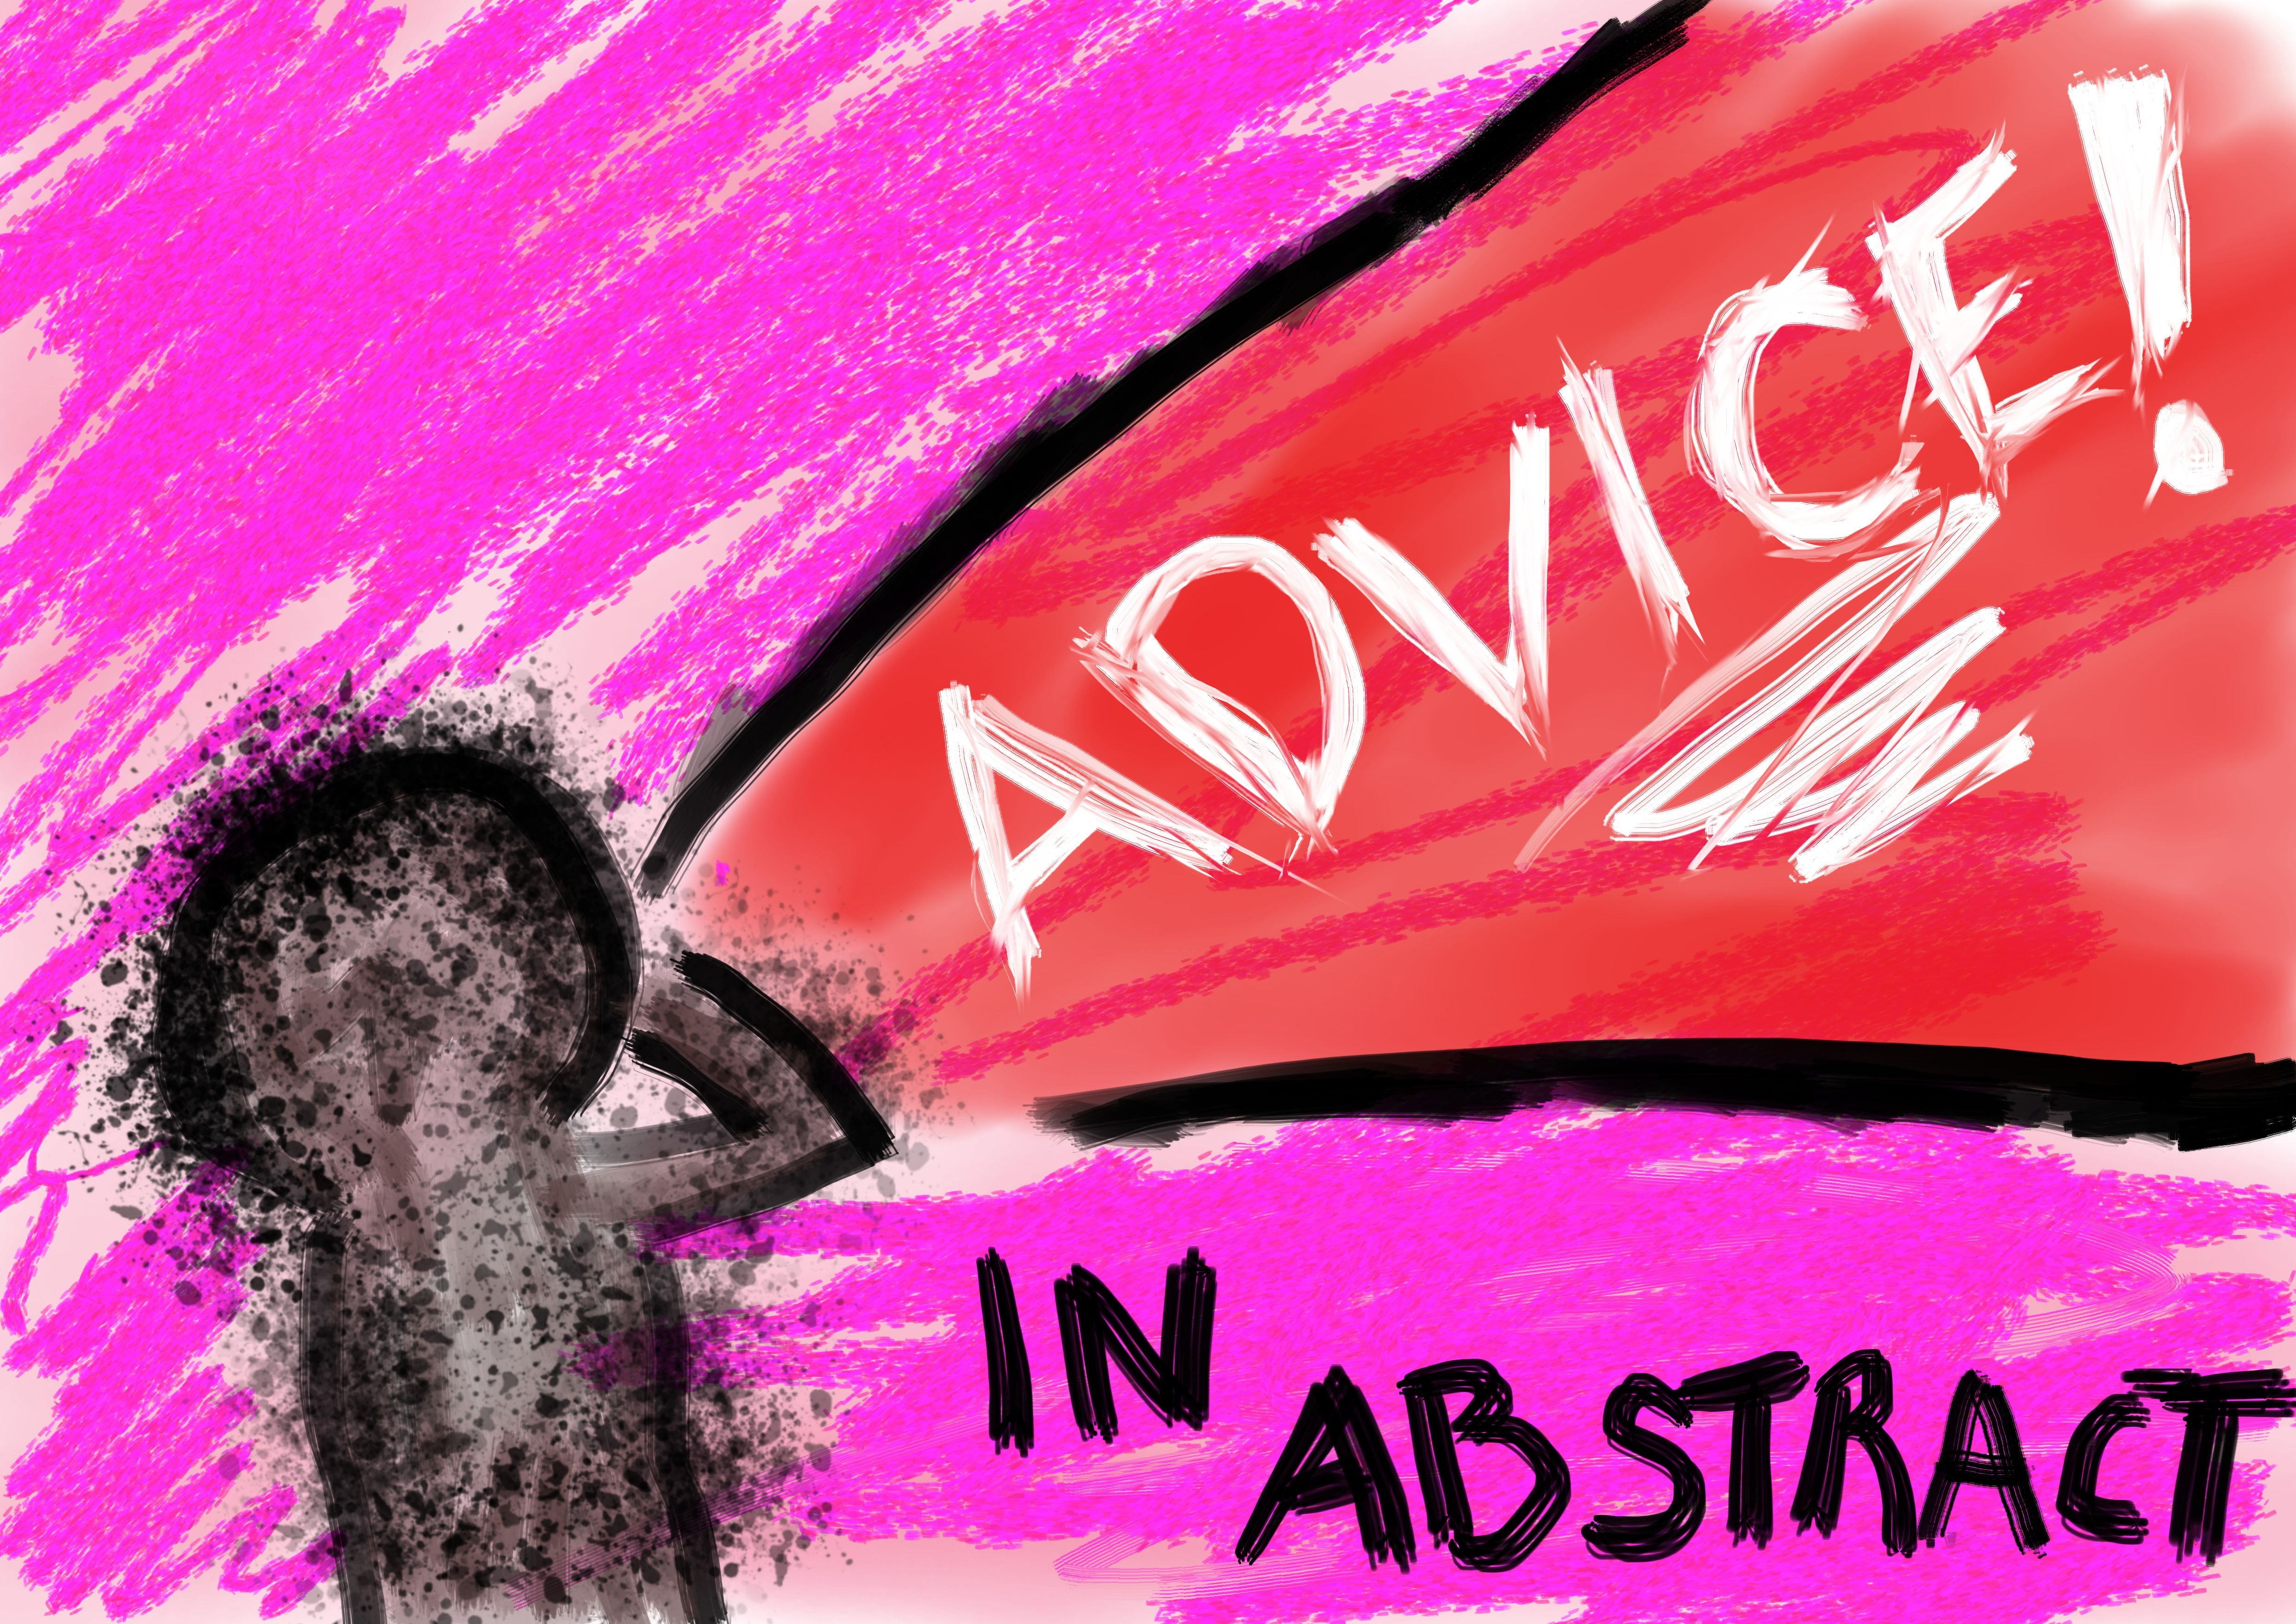 Advice in Abstract